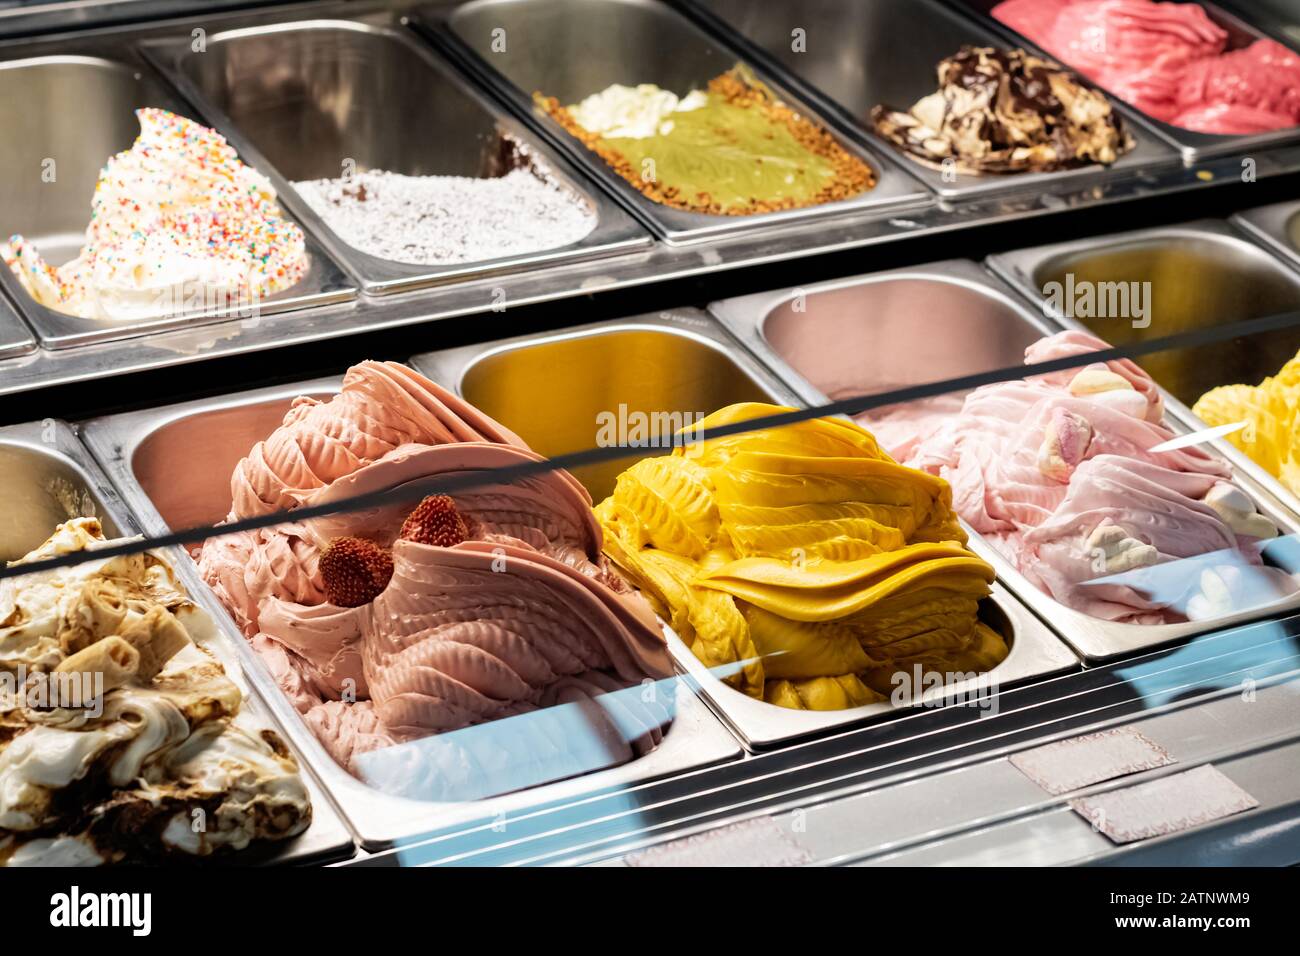 Containers of Toppings for Ice Cream Bar Stock Image - Image of merchino,  glass: 138059783